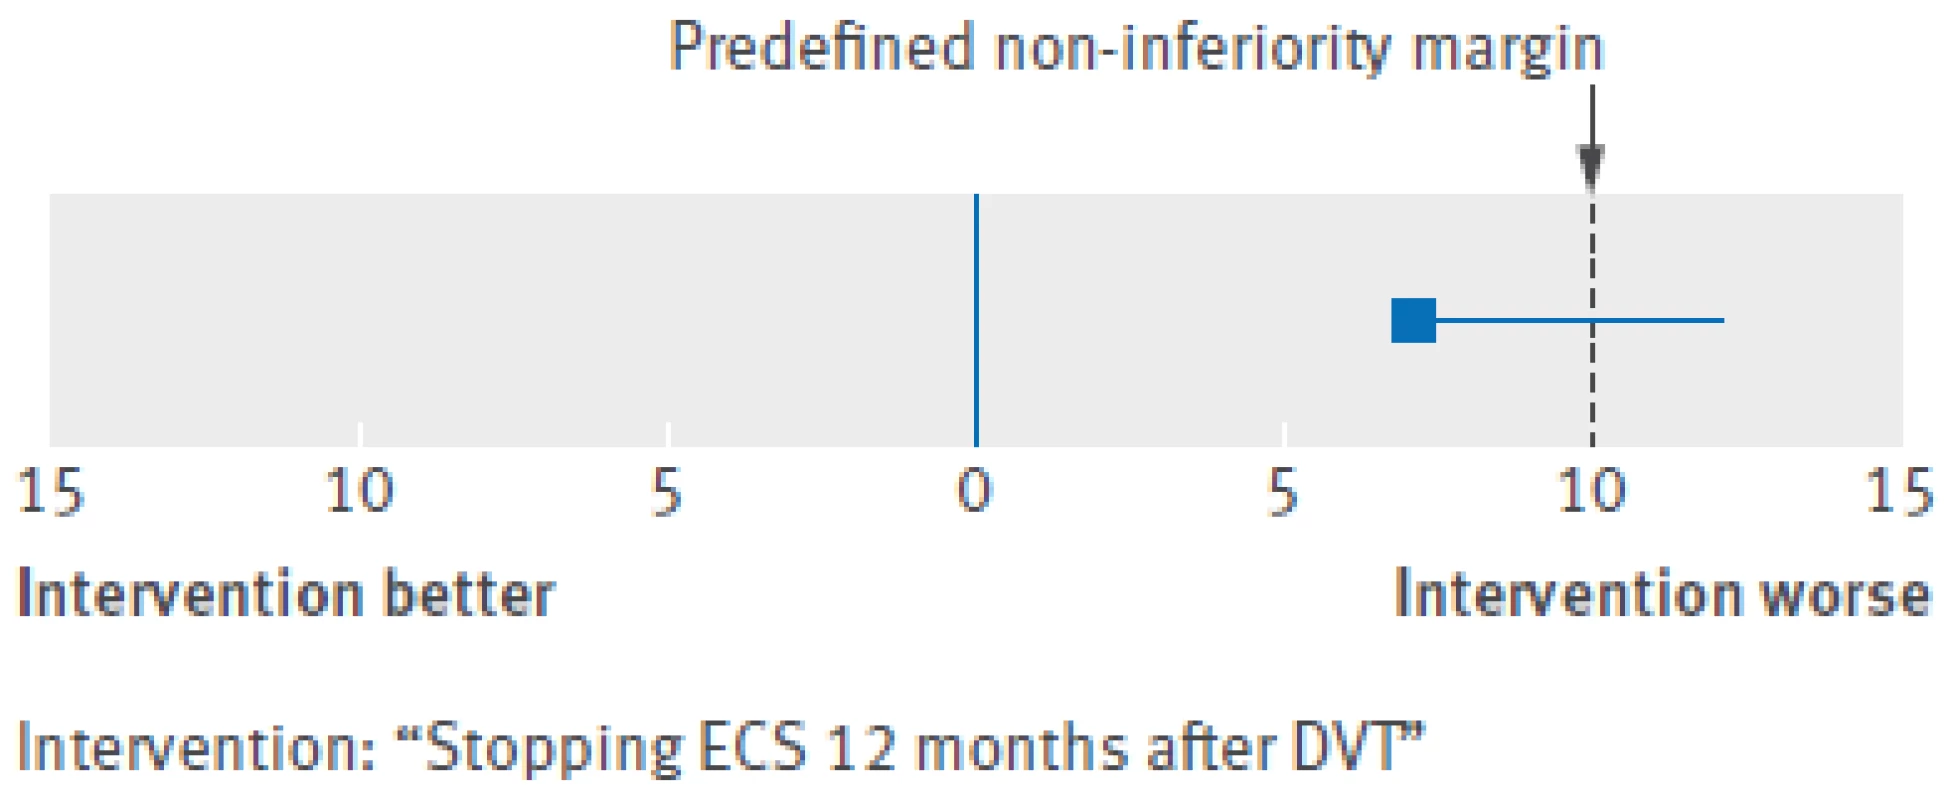 Treatment difference outcome with non-inferiority margin. DVT=deep venous thrombosis; ECS=elastic compression stockings